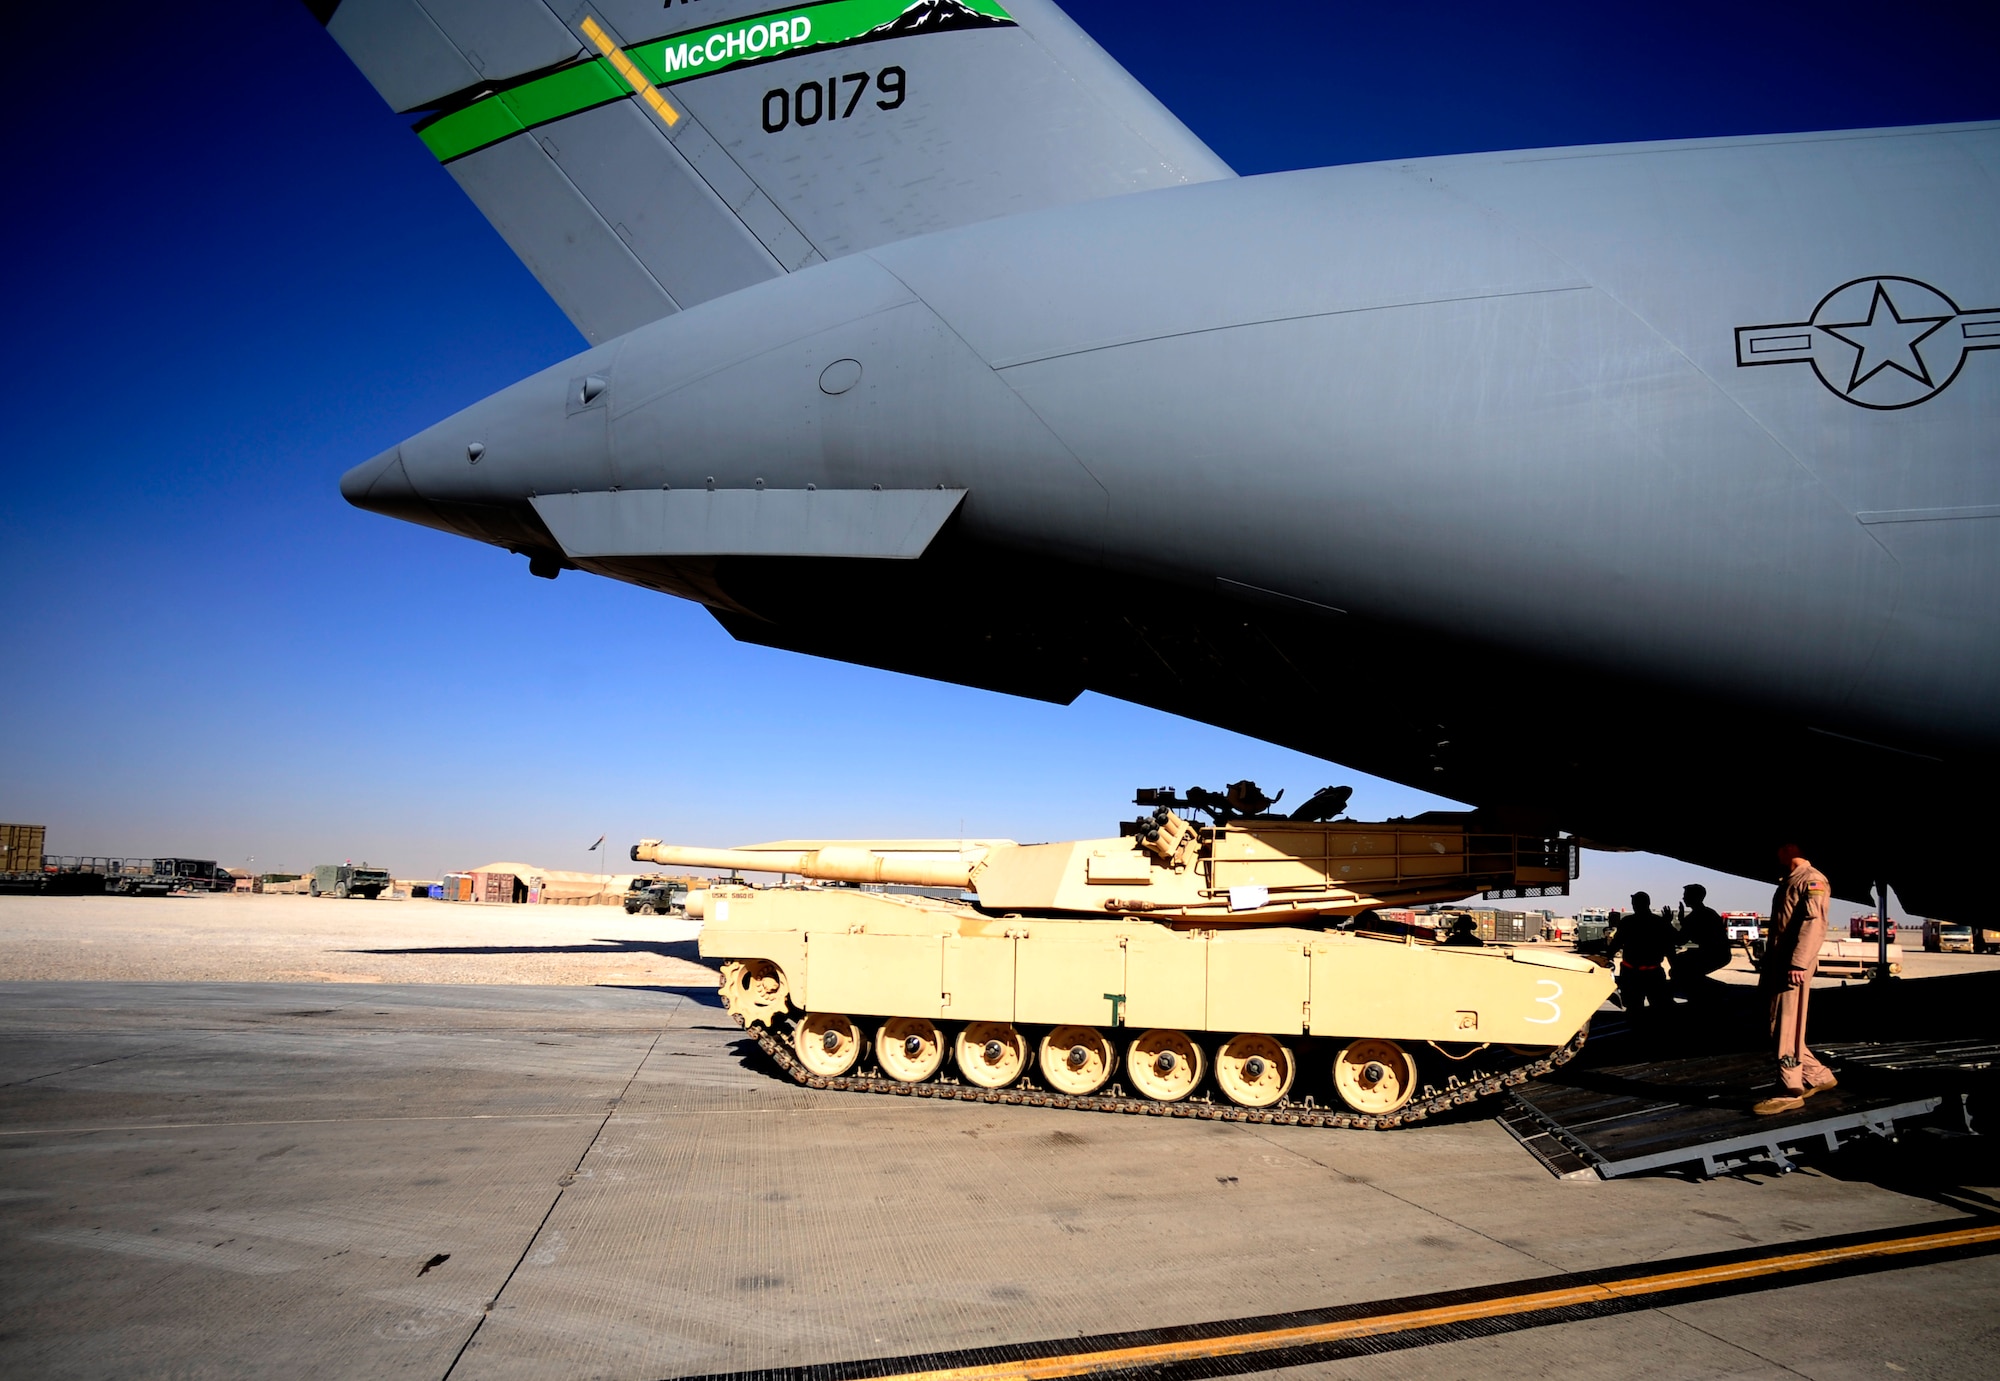 A C-17 Globemaster III aircraft assigned to the 816th Expeditionary Airlift Squadron at a non-disclosed base in Southwest Asia, delivers a Marine Corps M1A1 Abrams tank to Afghanistan in support of Operation Enduring Freedom on Nov. 28, 2010. (U.S. Air Force Photo/Staff Sgt. Andy M. Kin)